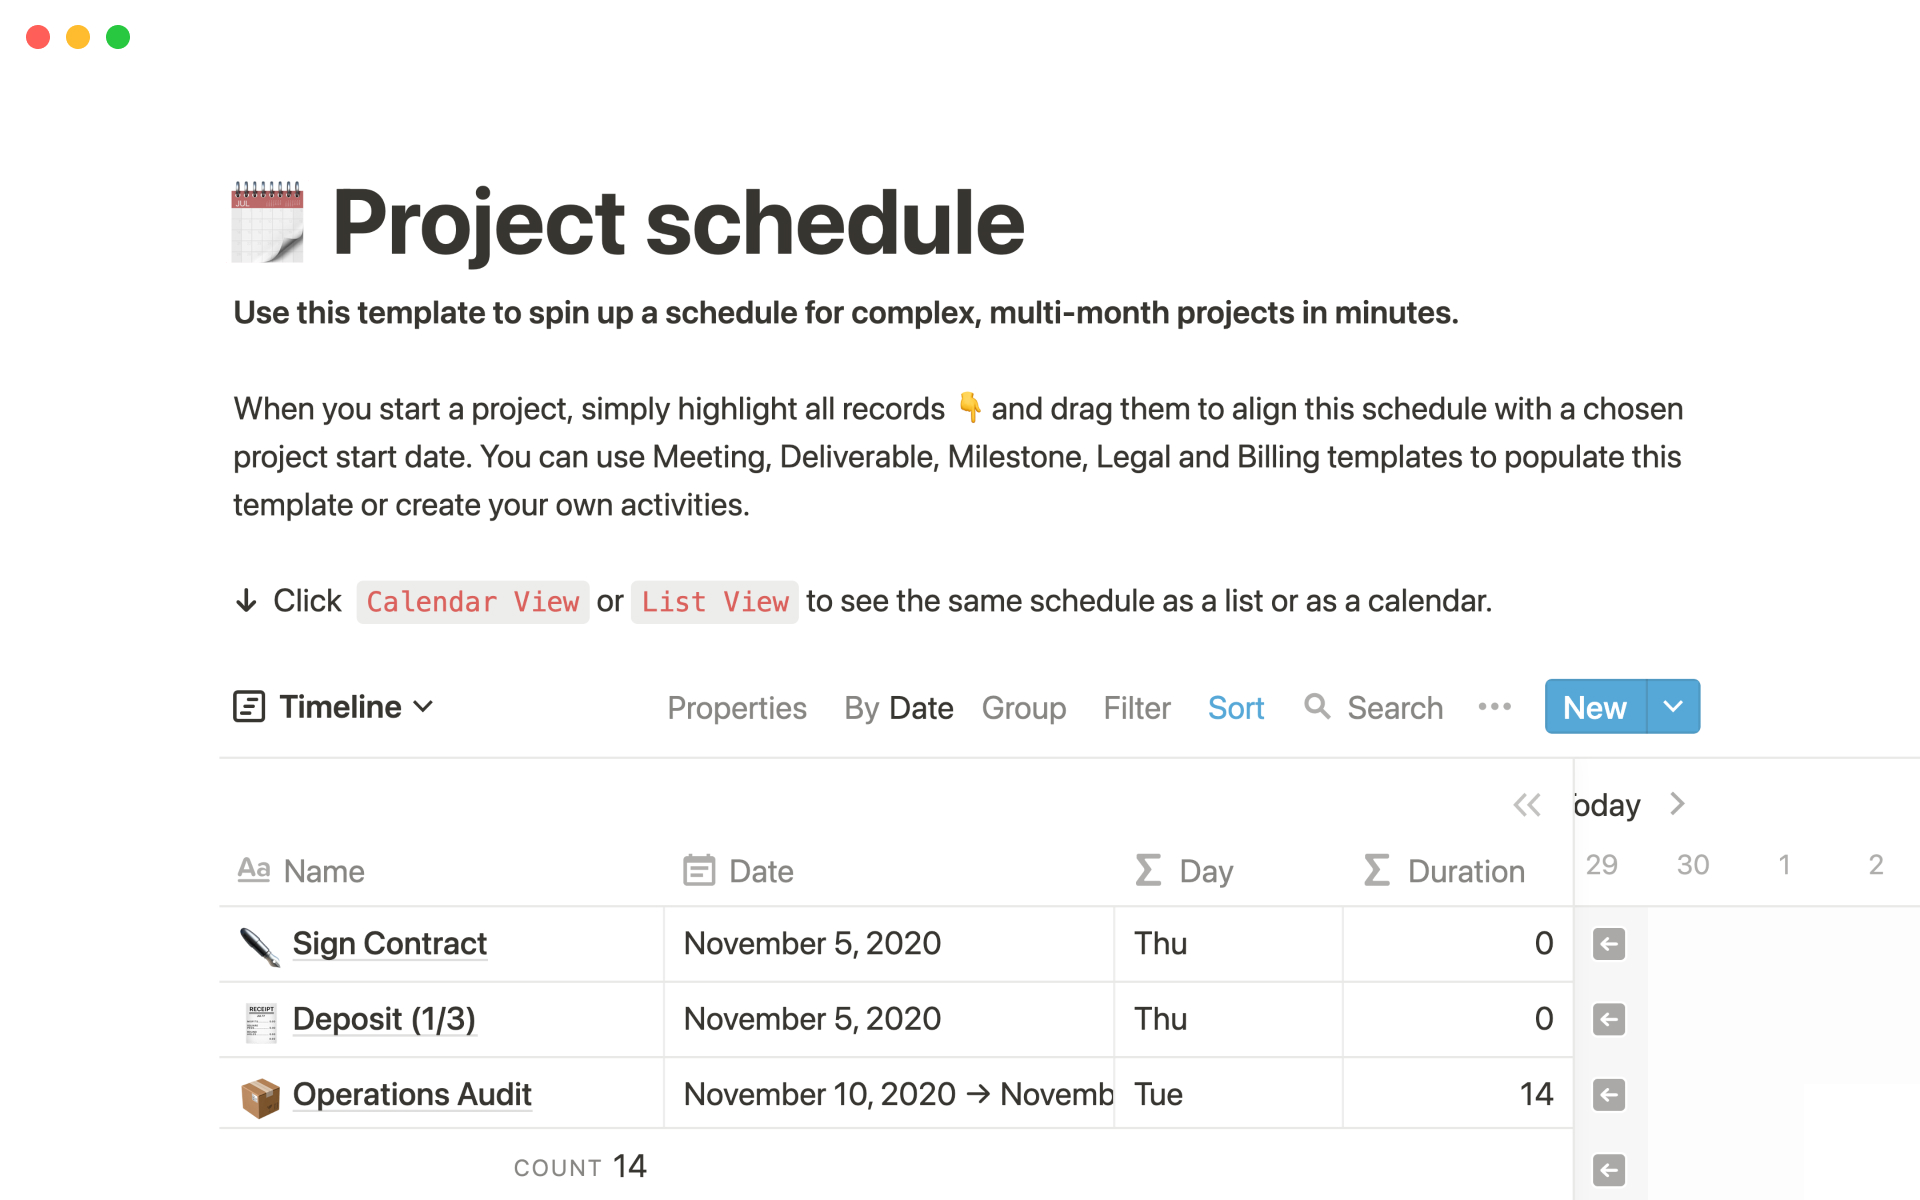 The desktop image for the Project schedule template